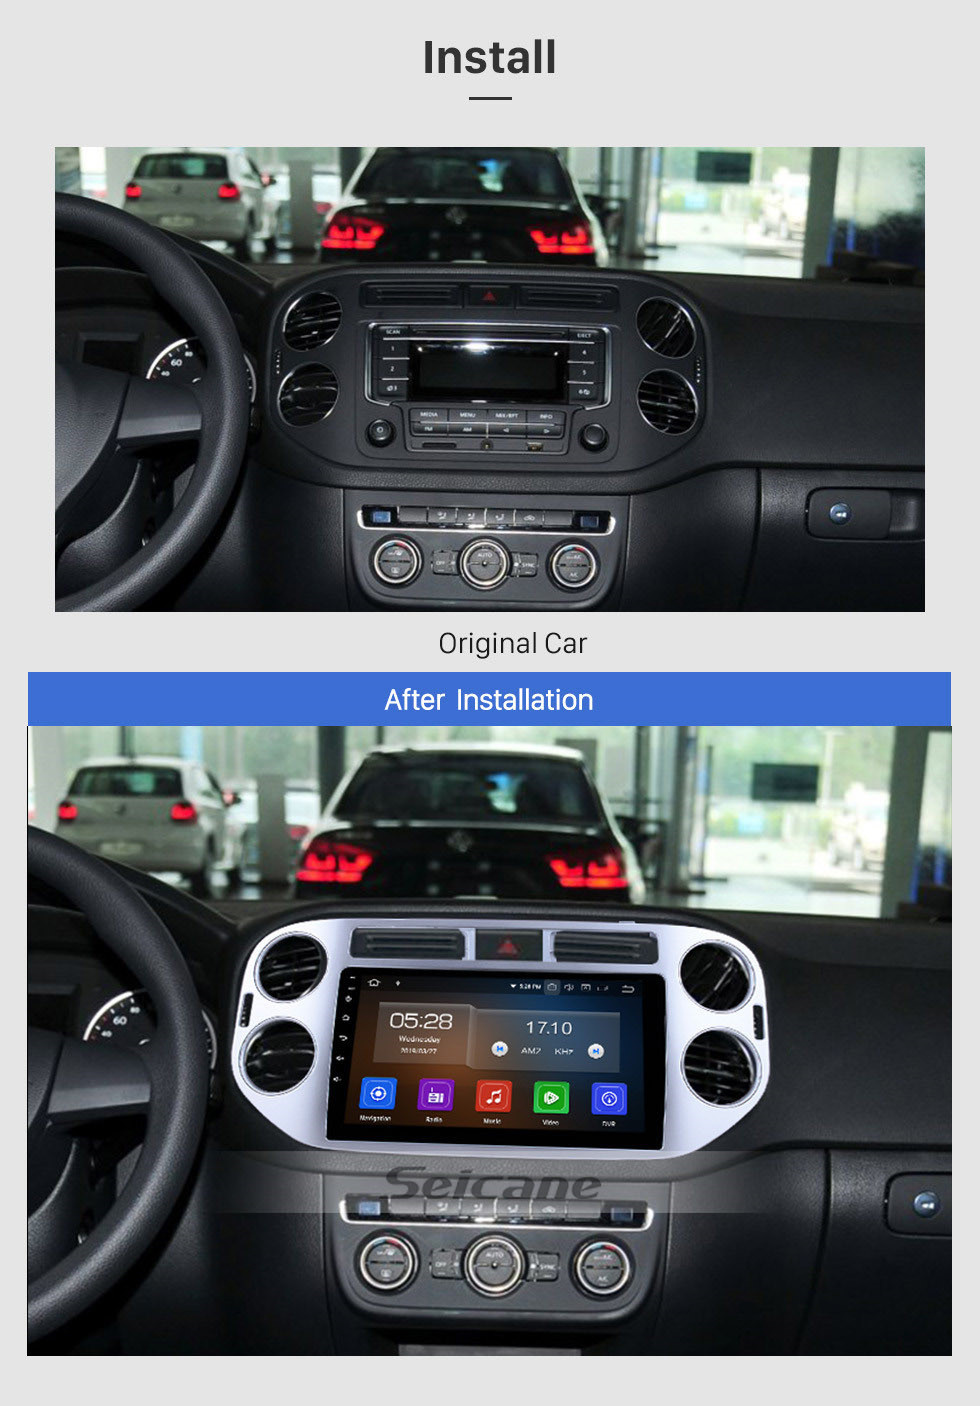 Seicane 9 Inch Android 11.0 Bluetooth Radio For 2010 2011 2012 2013 2014 2015 VW Volkswagen Tiguan WiFi GPS Navigation system Touch Screen Bluetooth TPMS DVR OBD II Rear camera AUX USB Carplay